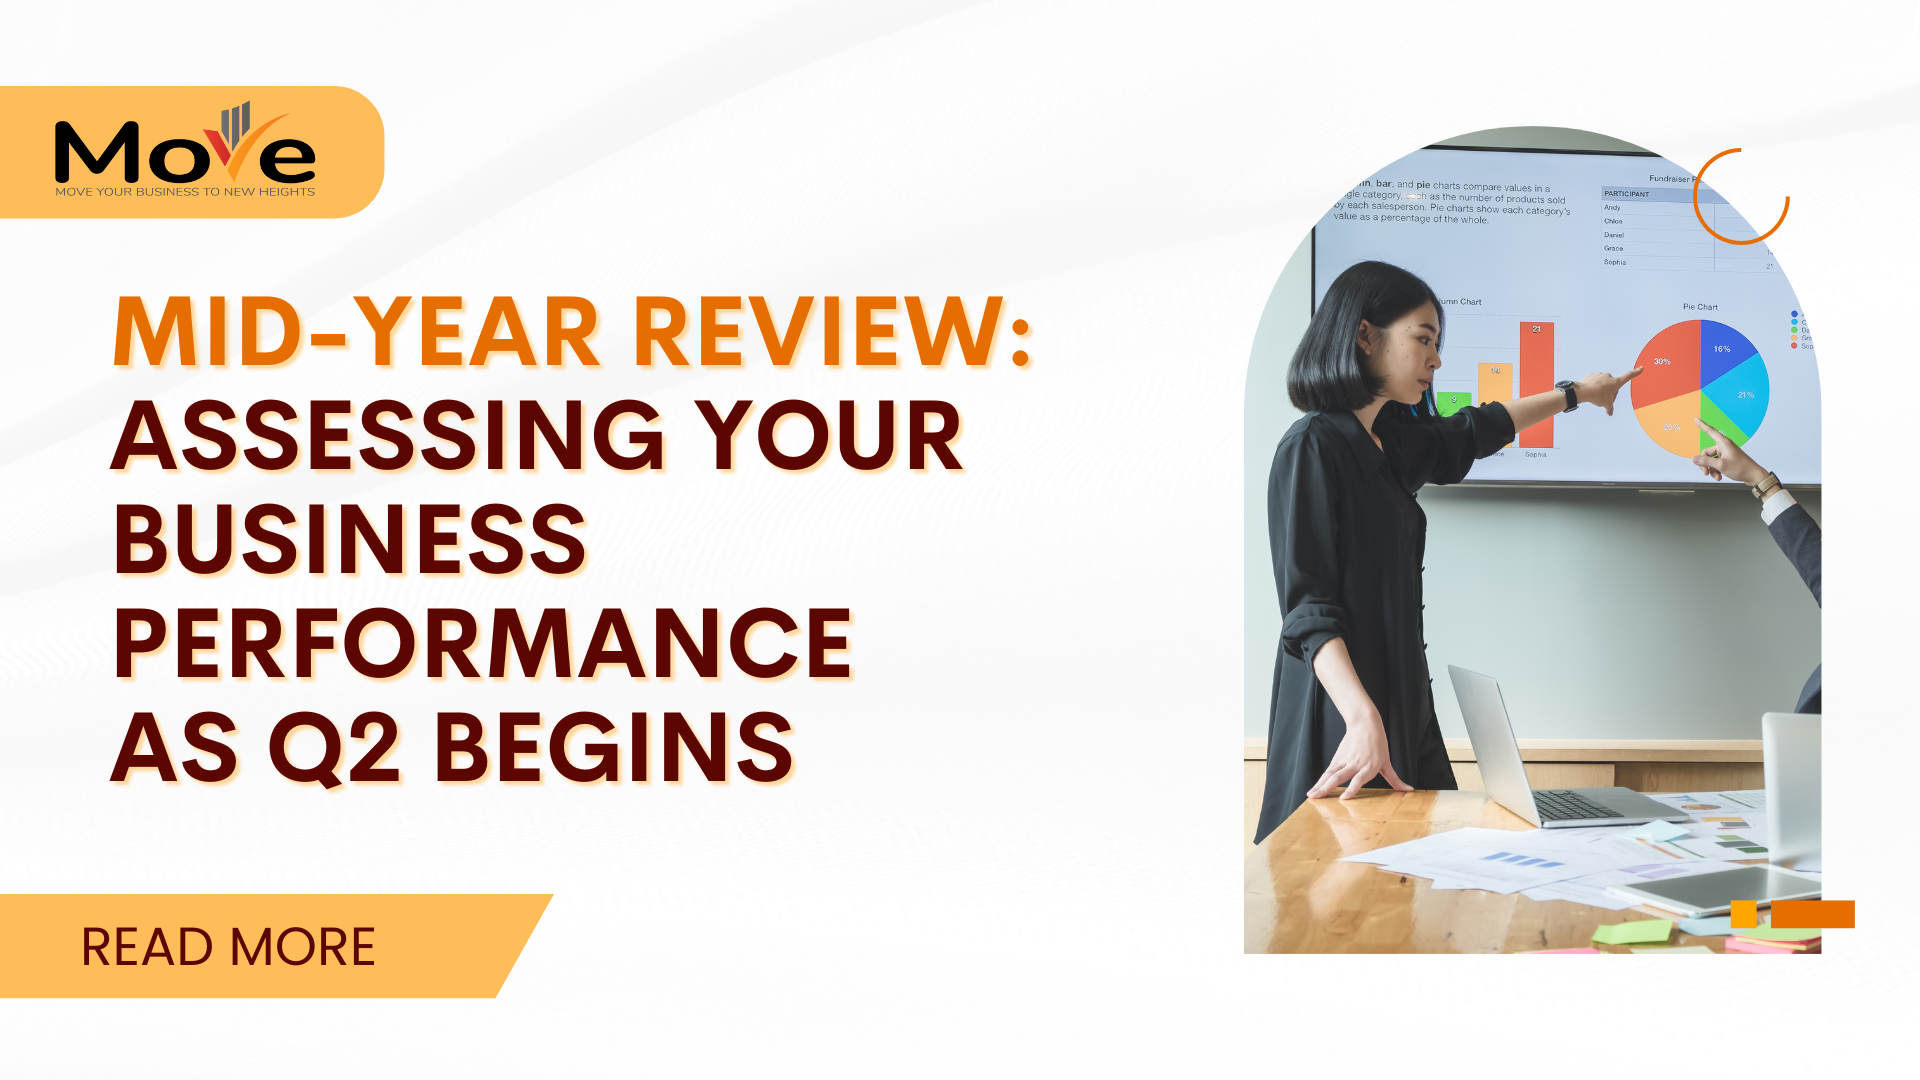 Mid-Year Review Assessing Your Business Performance as Q2 Begins